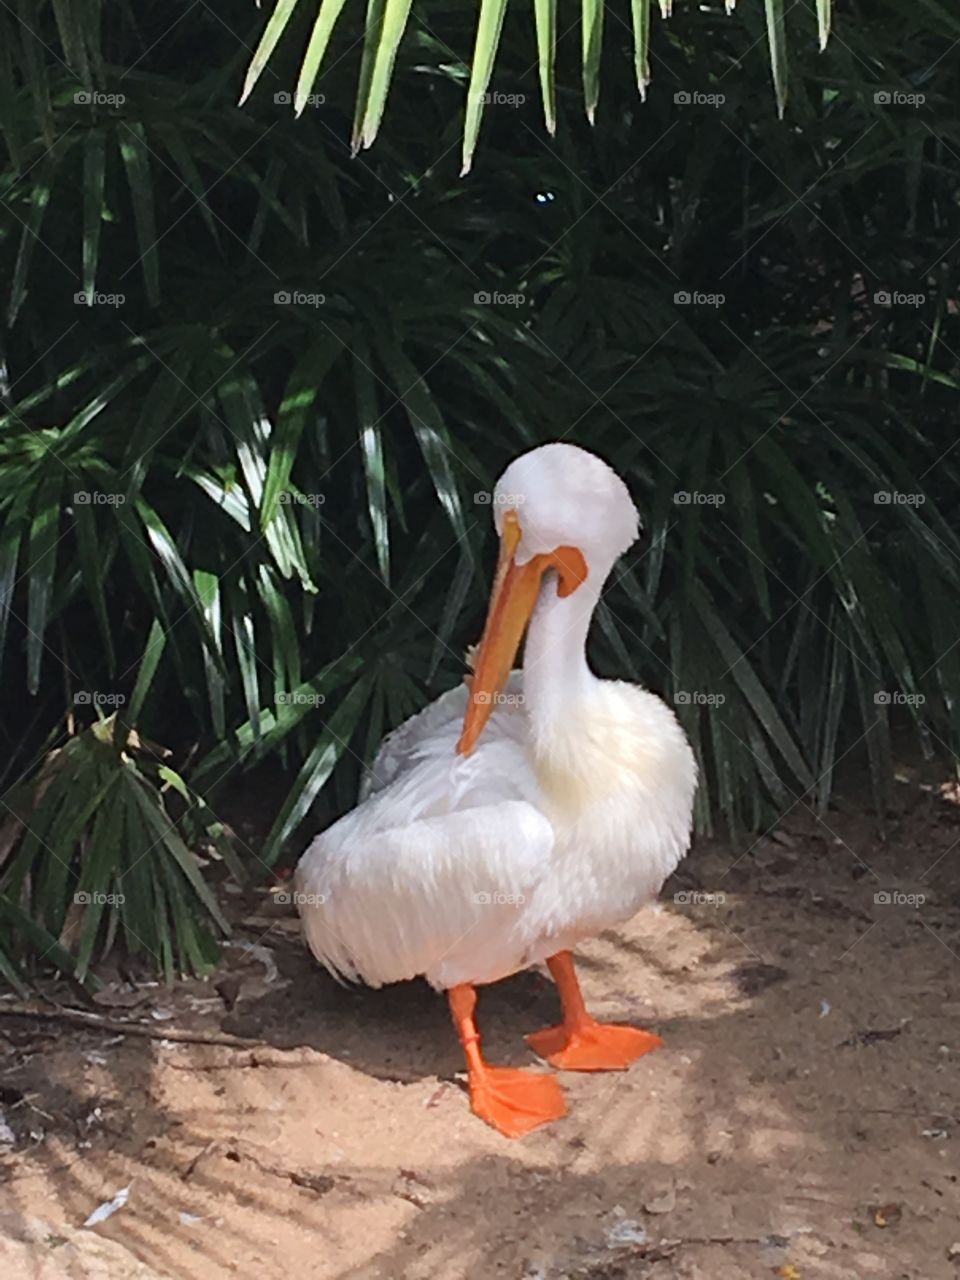 White pelican at Fort Worth zoo